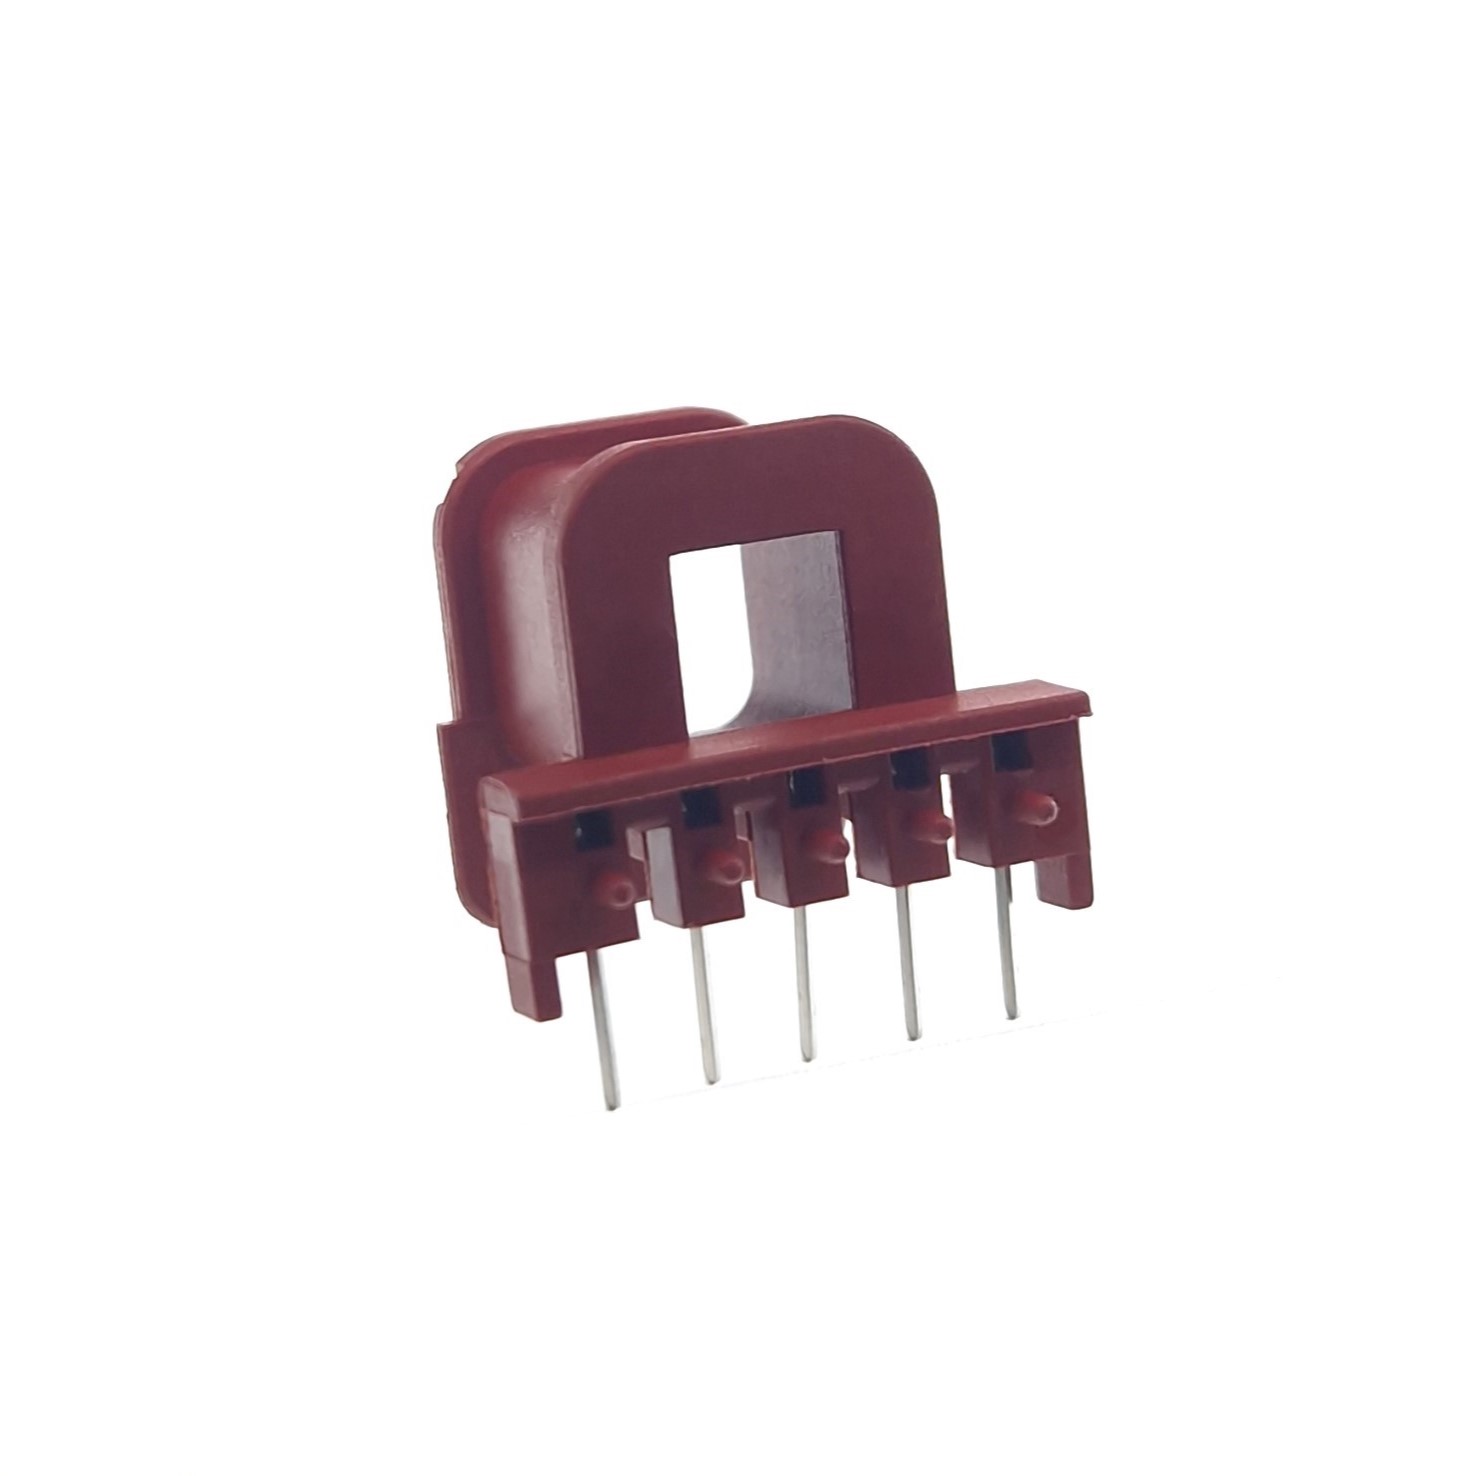 Magnetics - Transformer, Inductor Components